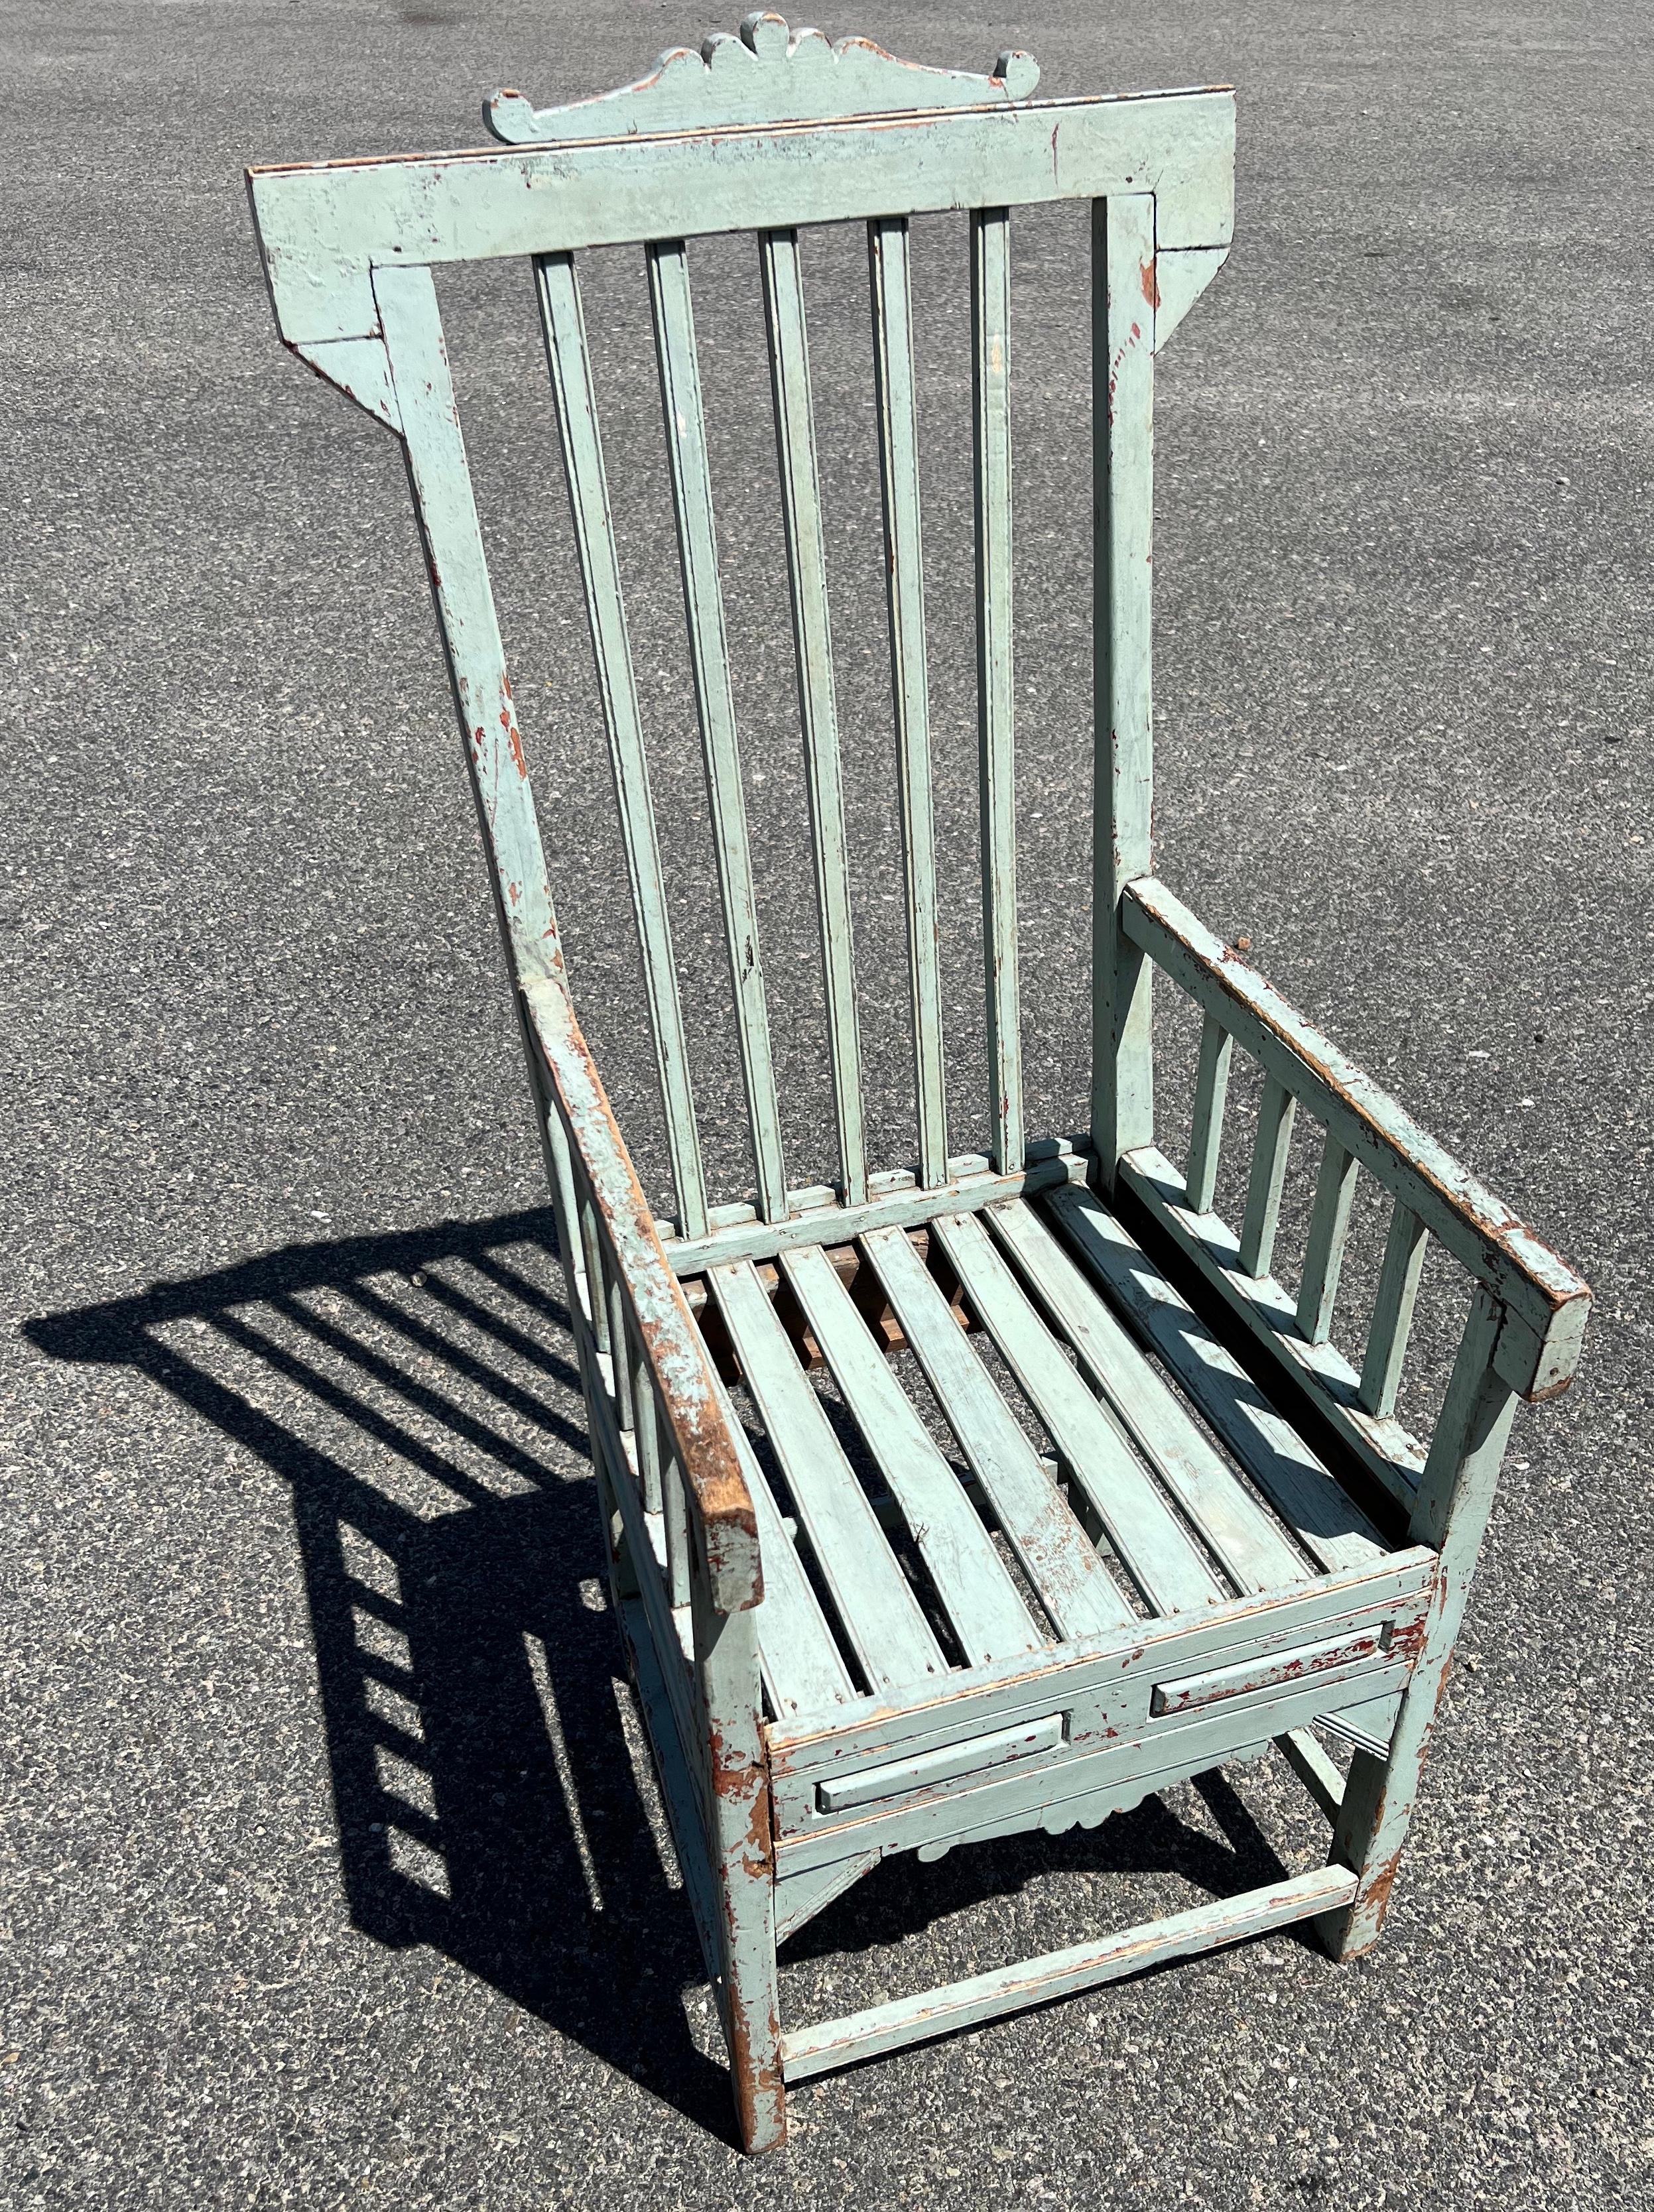 Slatted Eastlake-style arm chair with detailed apron in original pale blue/green over red paint.